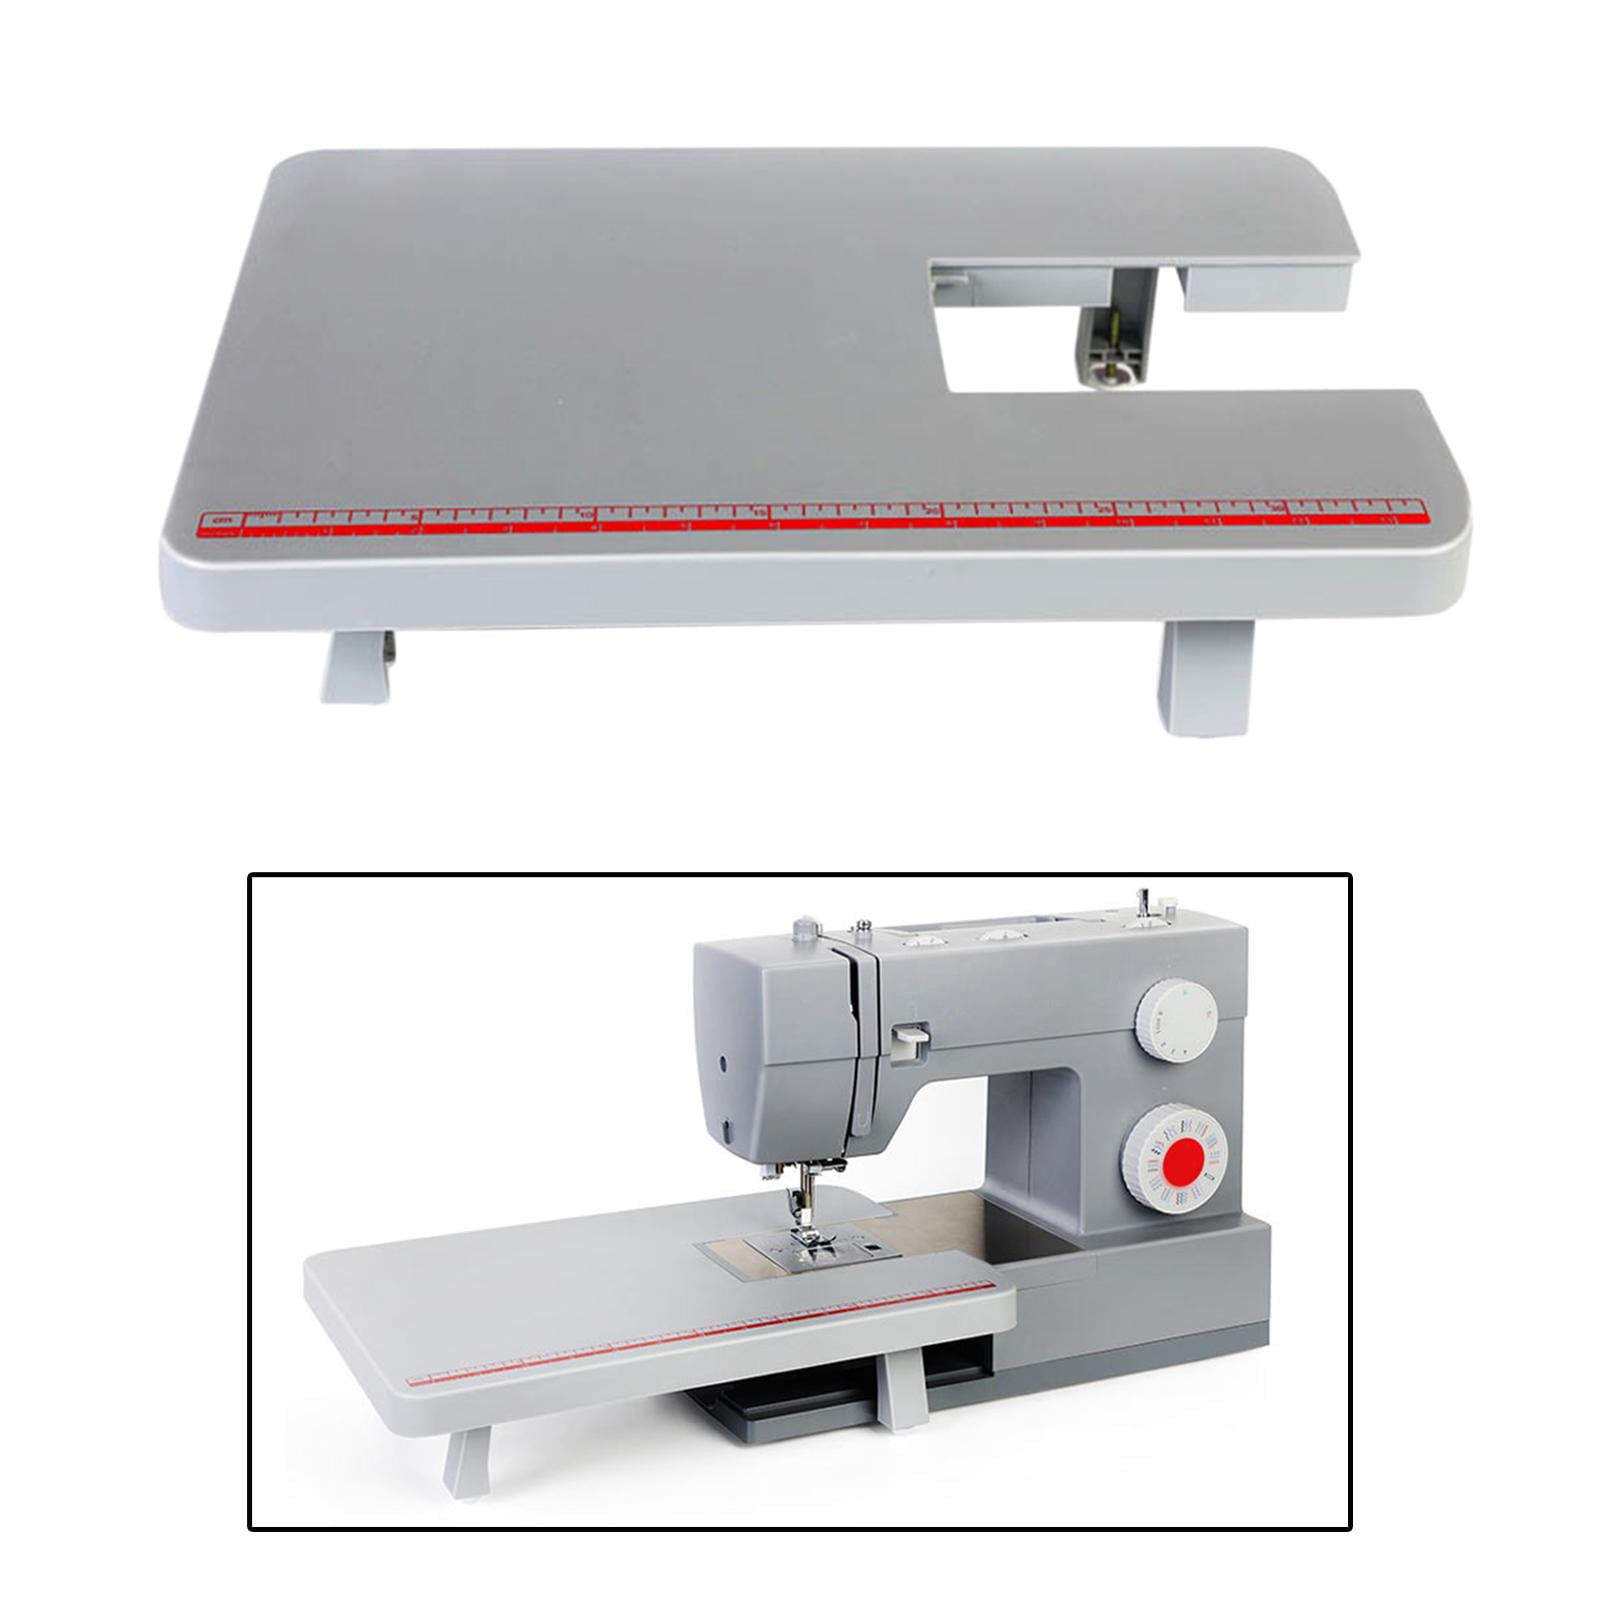 AMWBSR Heavy Duty Sewing Machines Extension Table for Singer 4411, 4423, 4432, 4452 Mechanical Heavy Duty Sewing Machines, Grey